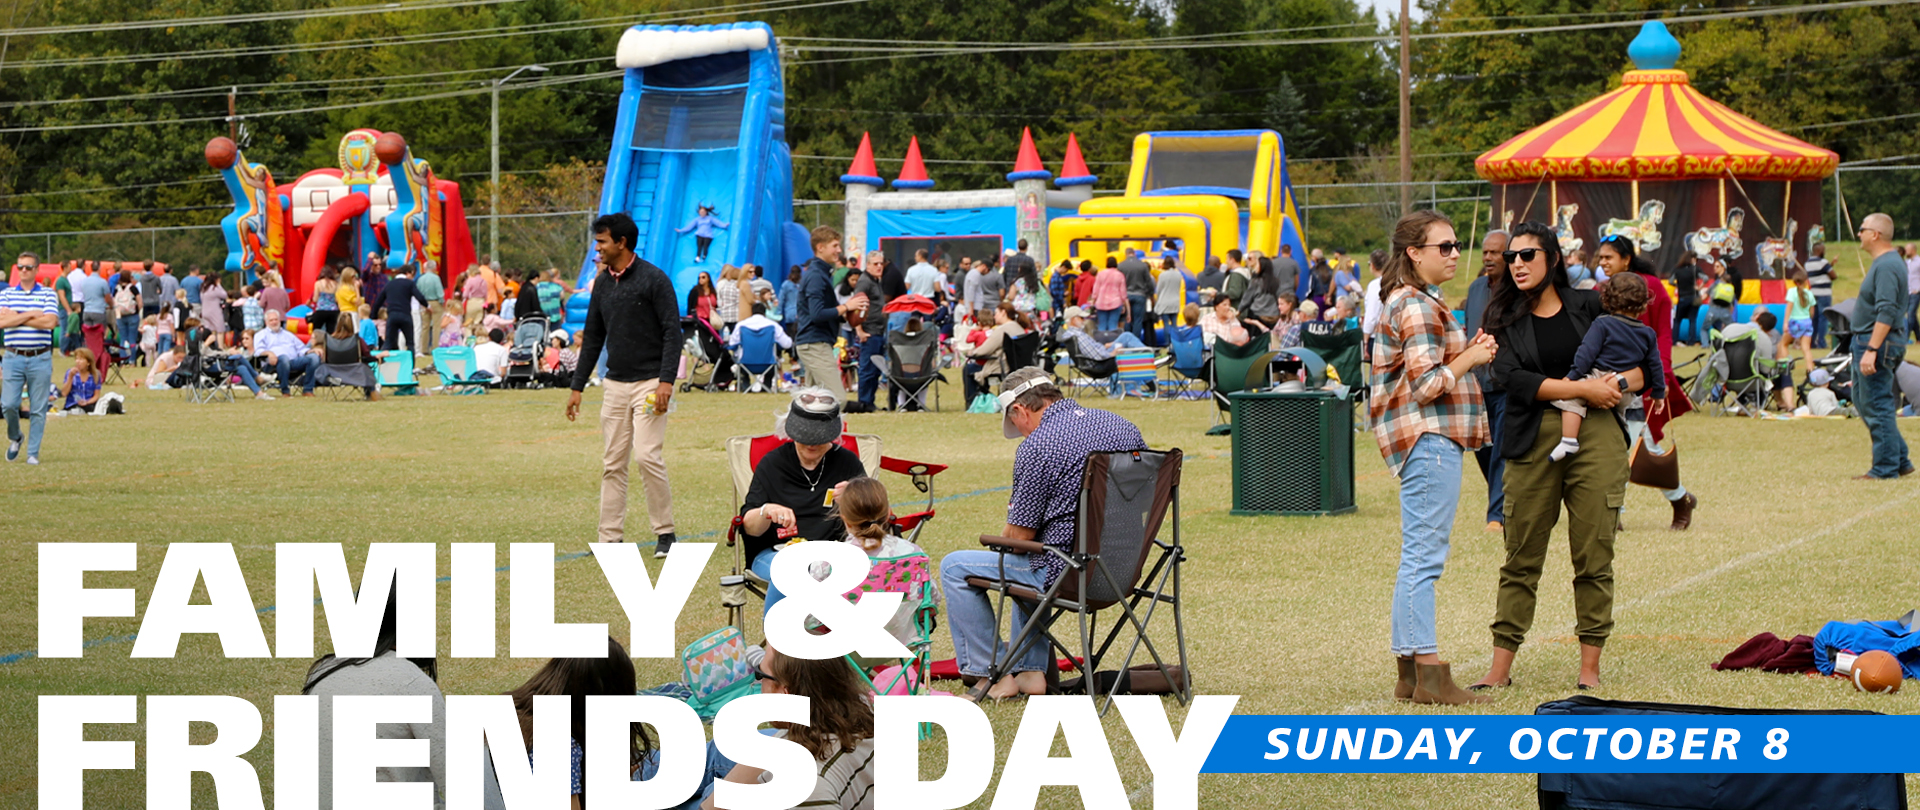 Family & Friends Day 
Sunday, October 8
Worship, Lunch & Fellowship
FREE — Fun for all ages!
